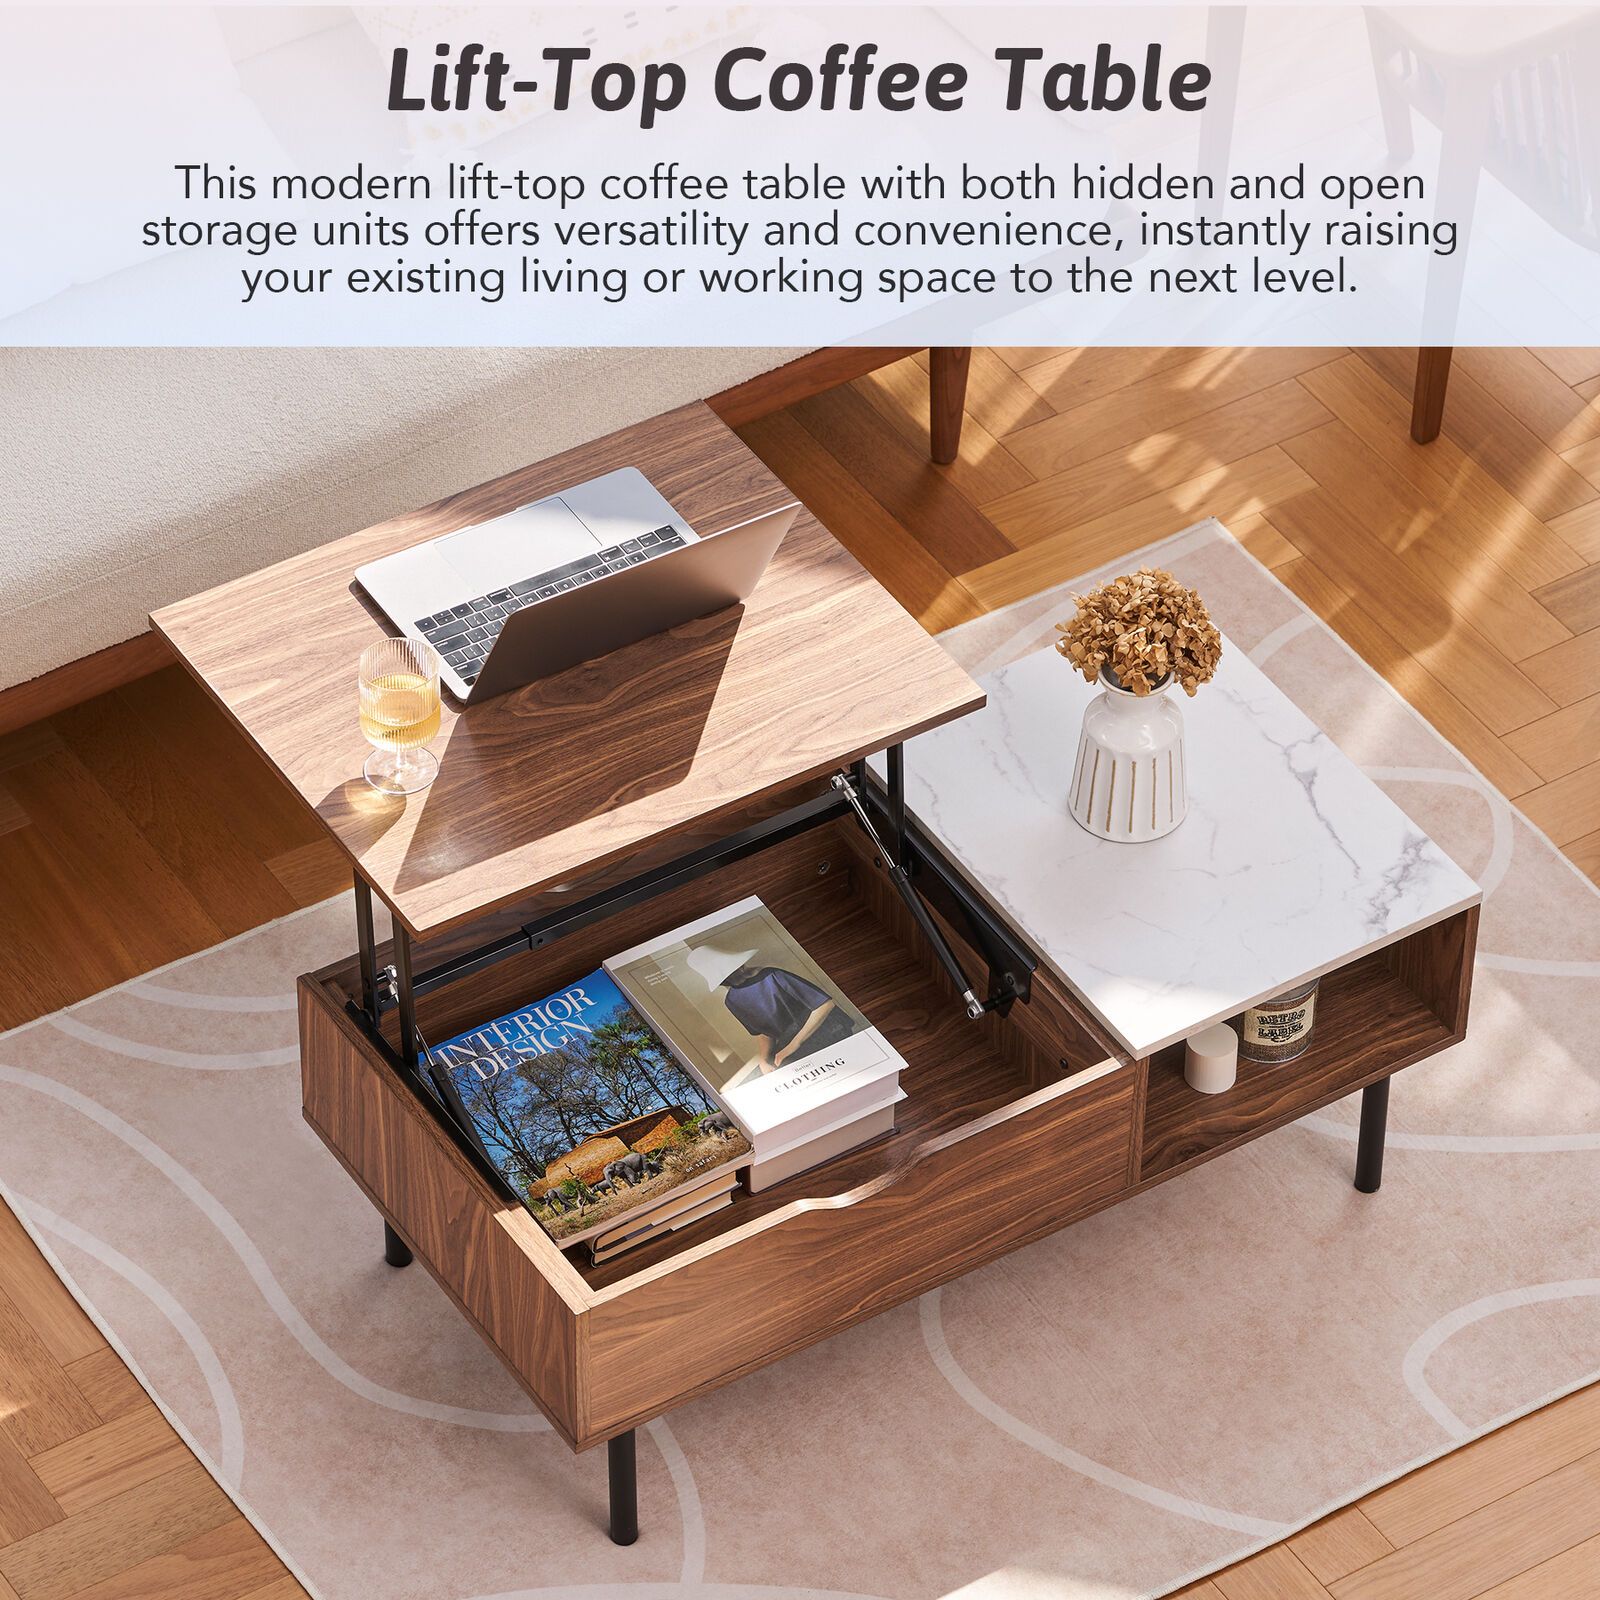 Lift Top Coffee Table With Hidden Storage And Side Drawer For Living Room |  Ebay For Lift Top Coffee Tables With Hidden Storage Compartments (View 5 of 15)